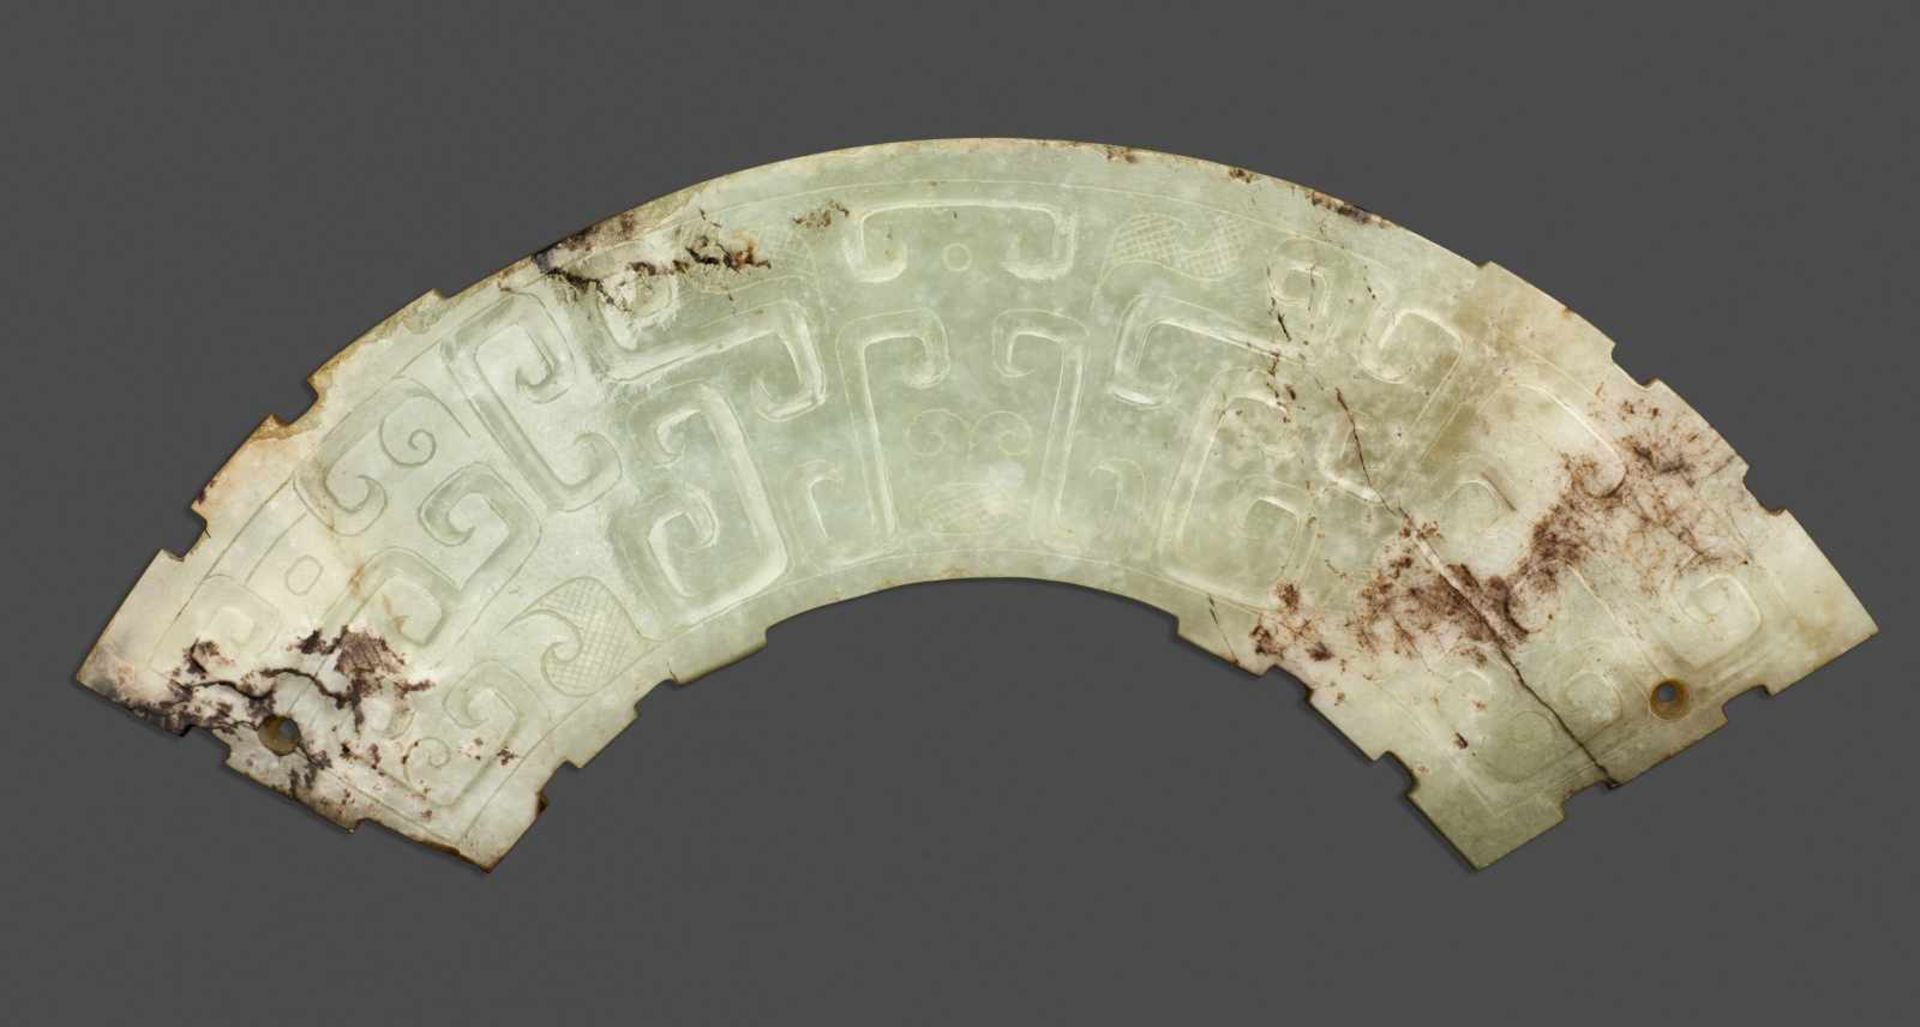 HUANG WITH DRAGONS This jade is published in Filippo Salviati 4000 YEARS OF CHINESE ARCHAIC JADES